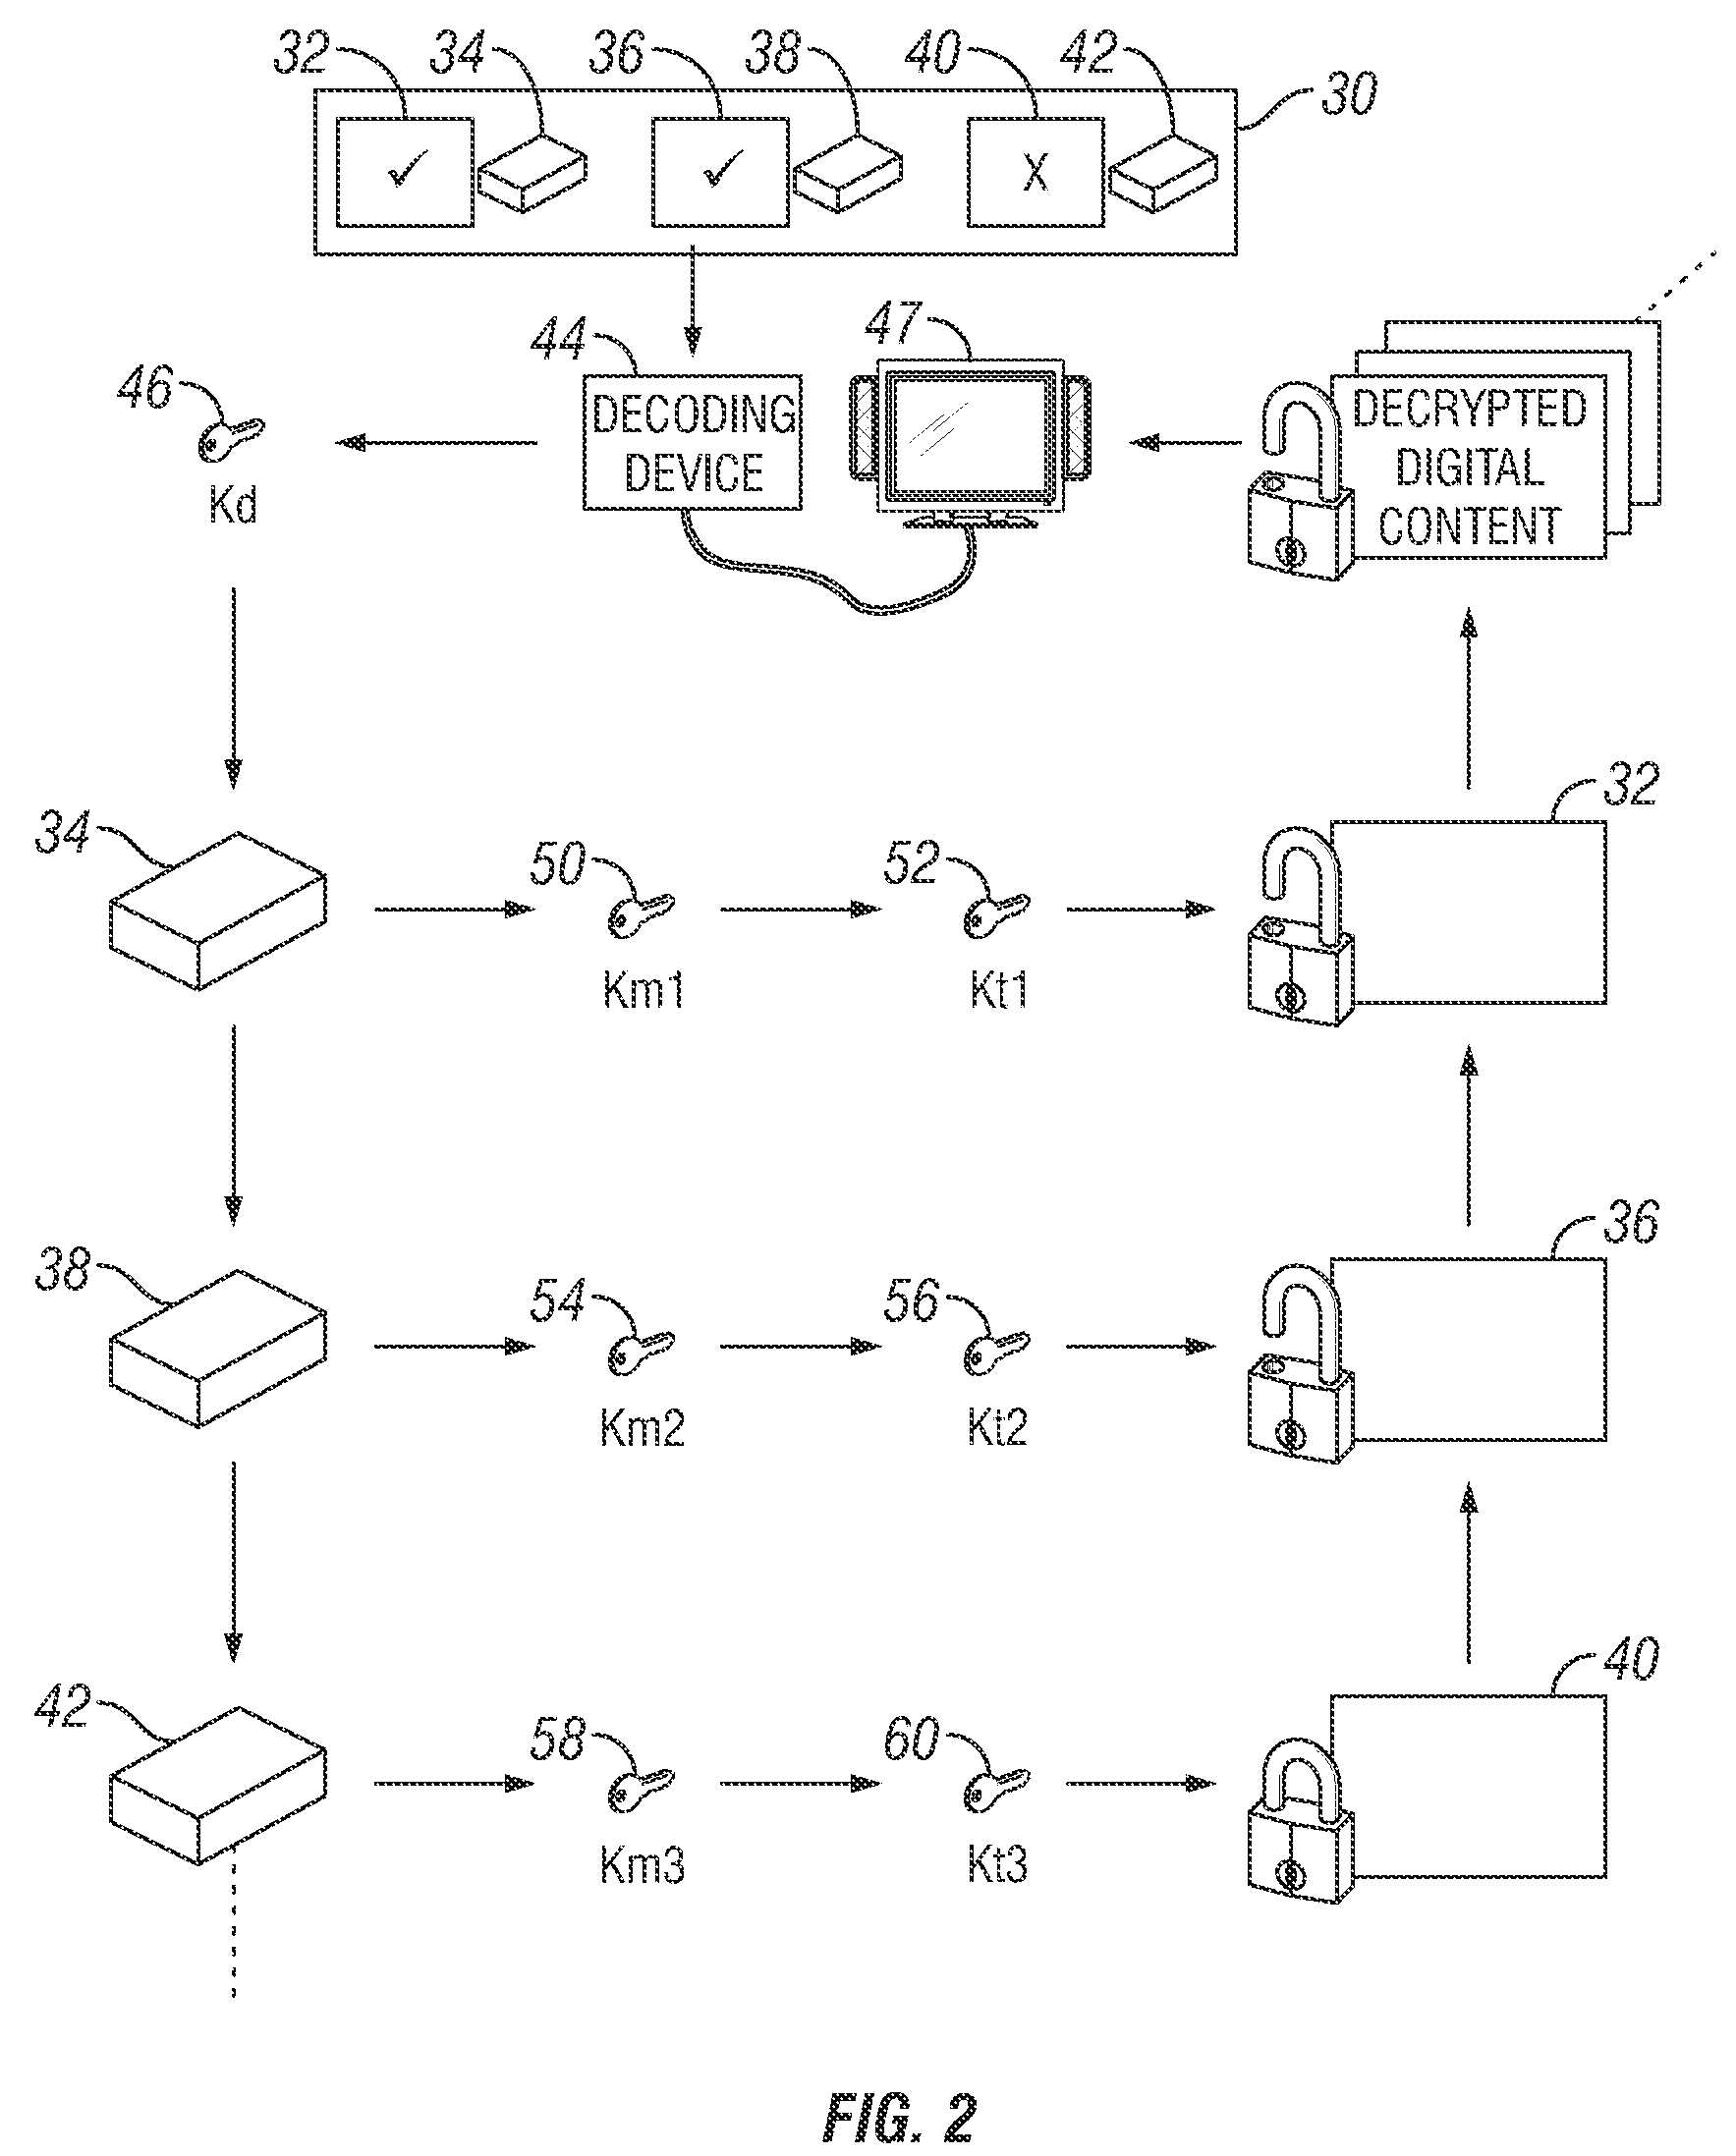 Method for controlling access to encrypted content using multiple broadcast encryption based control blocks